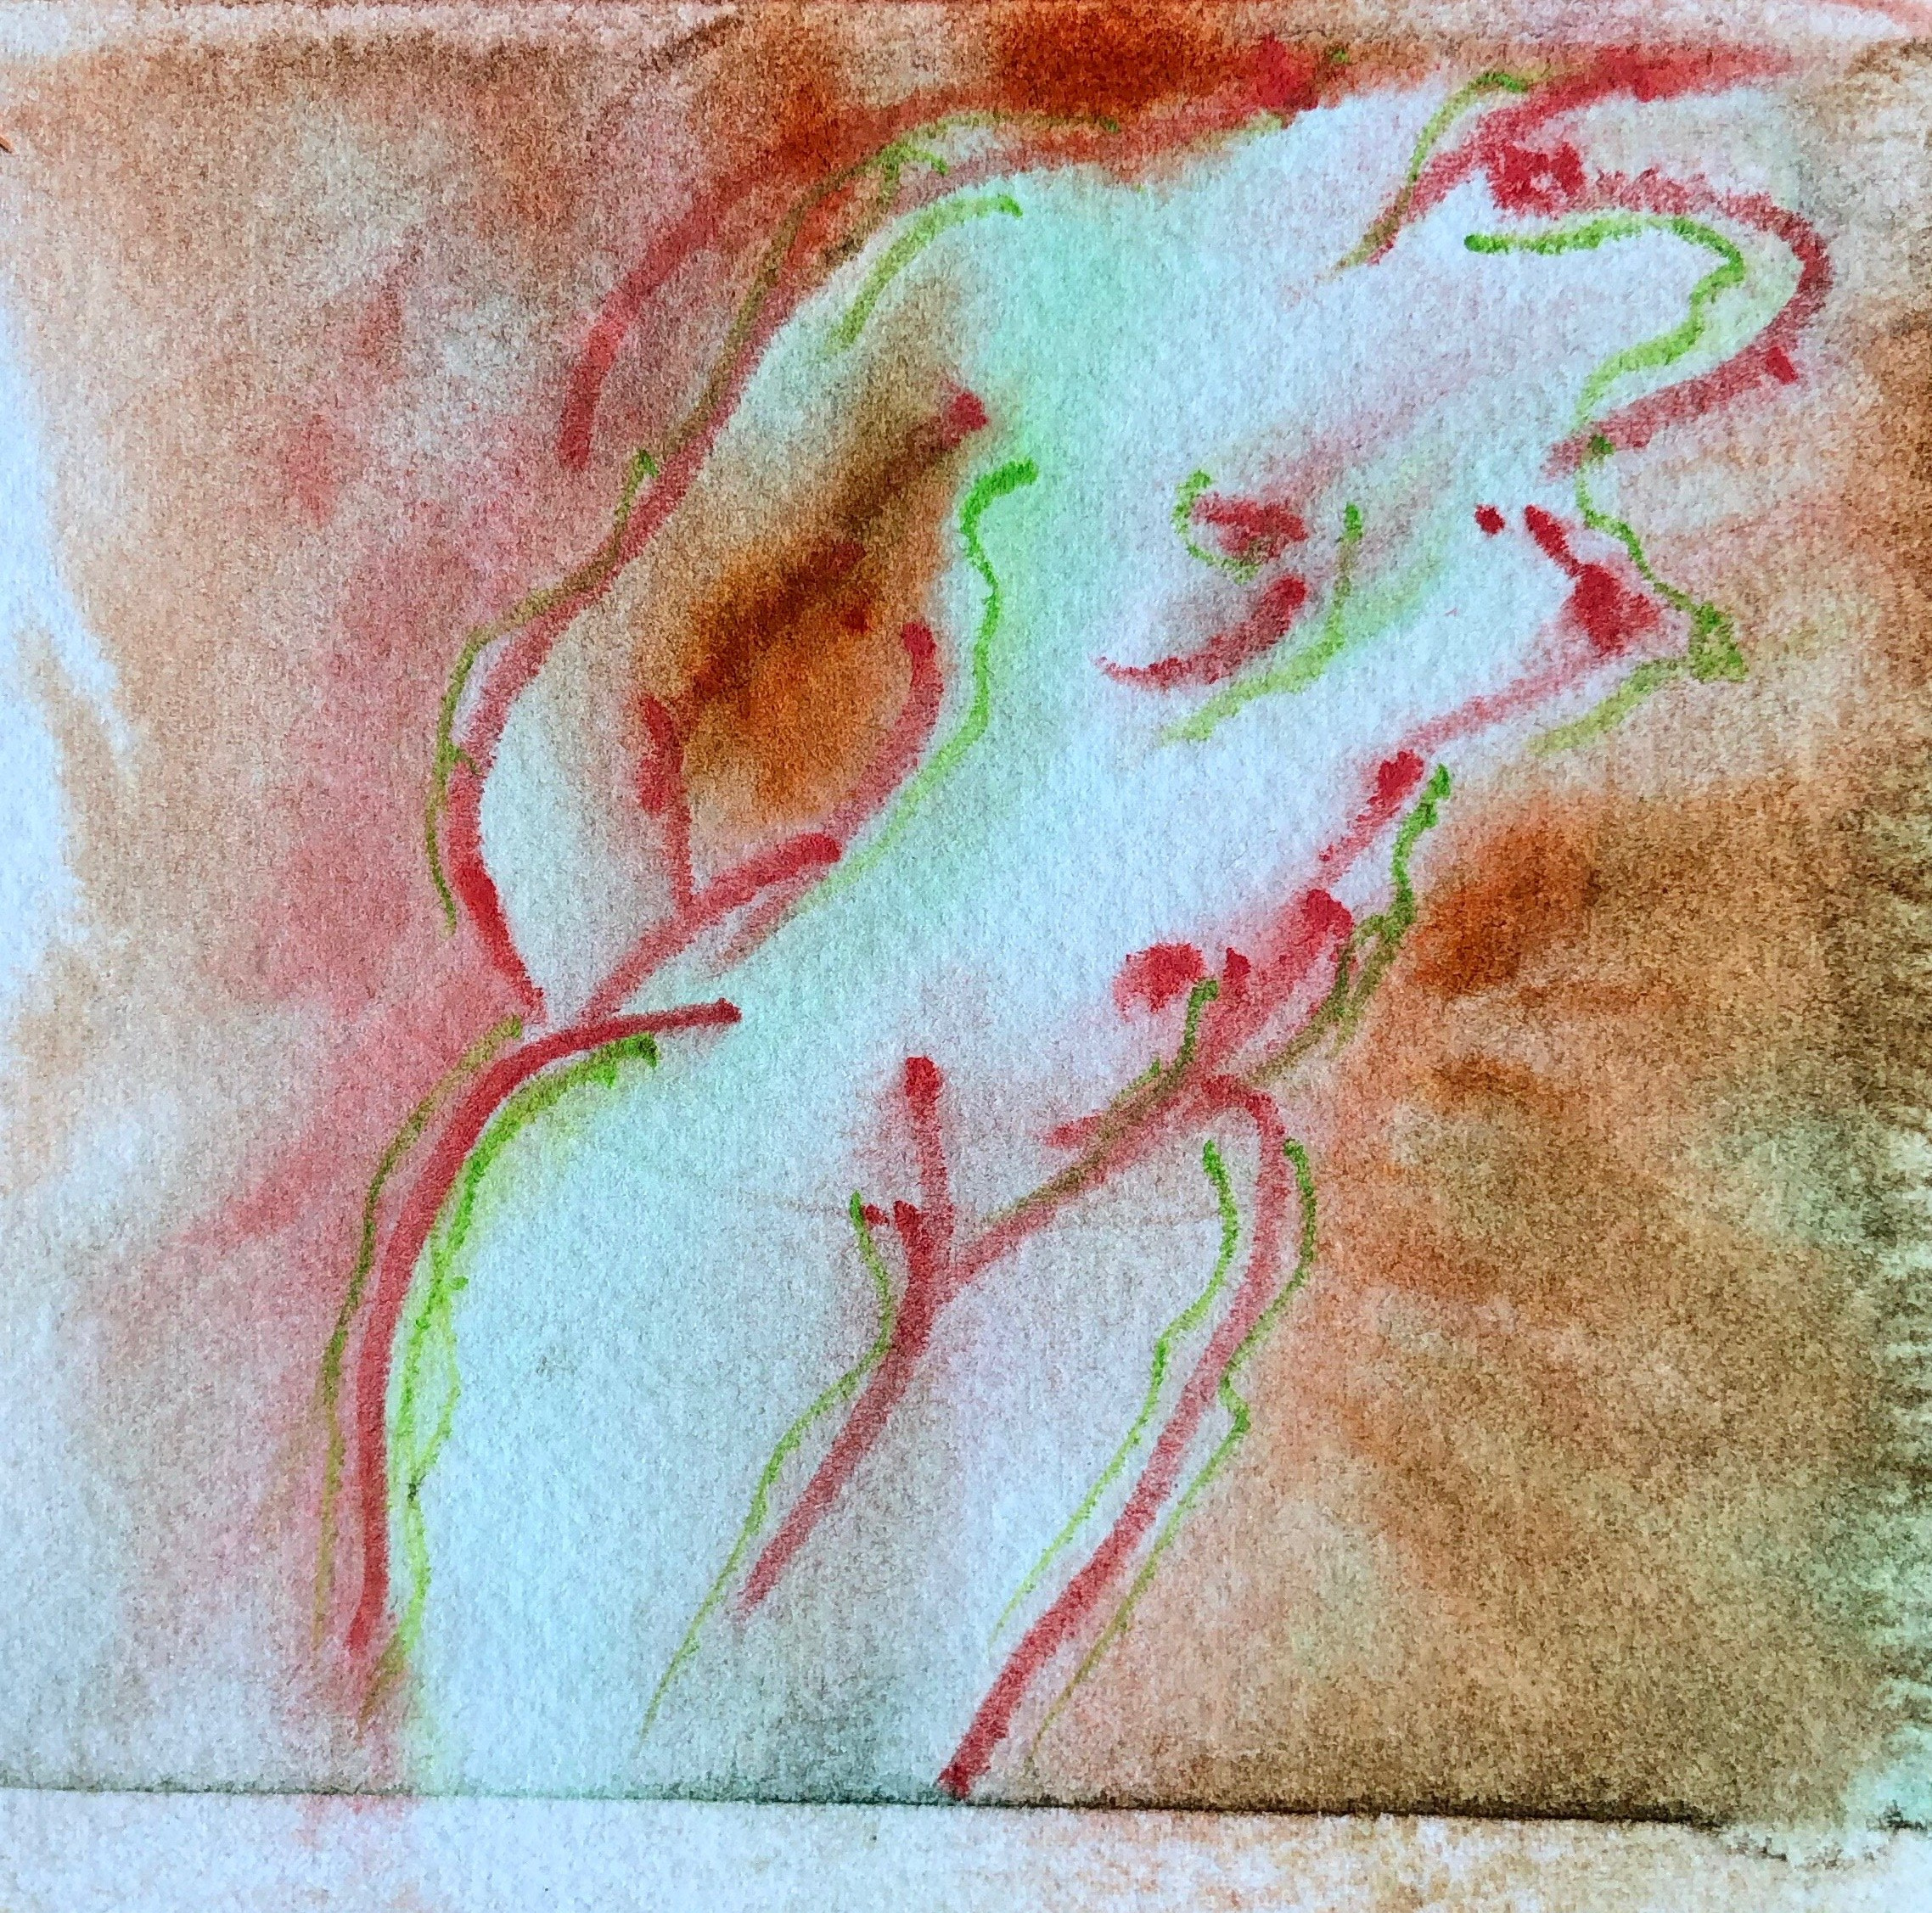  NUDE IN RED, 2017, 12x13, 